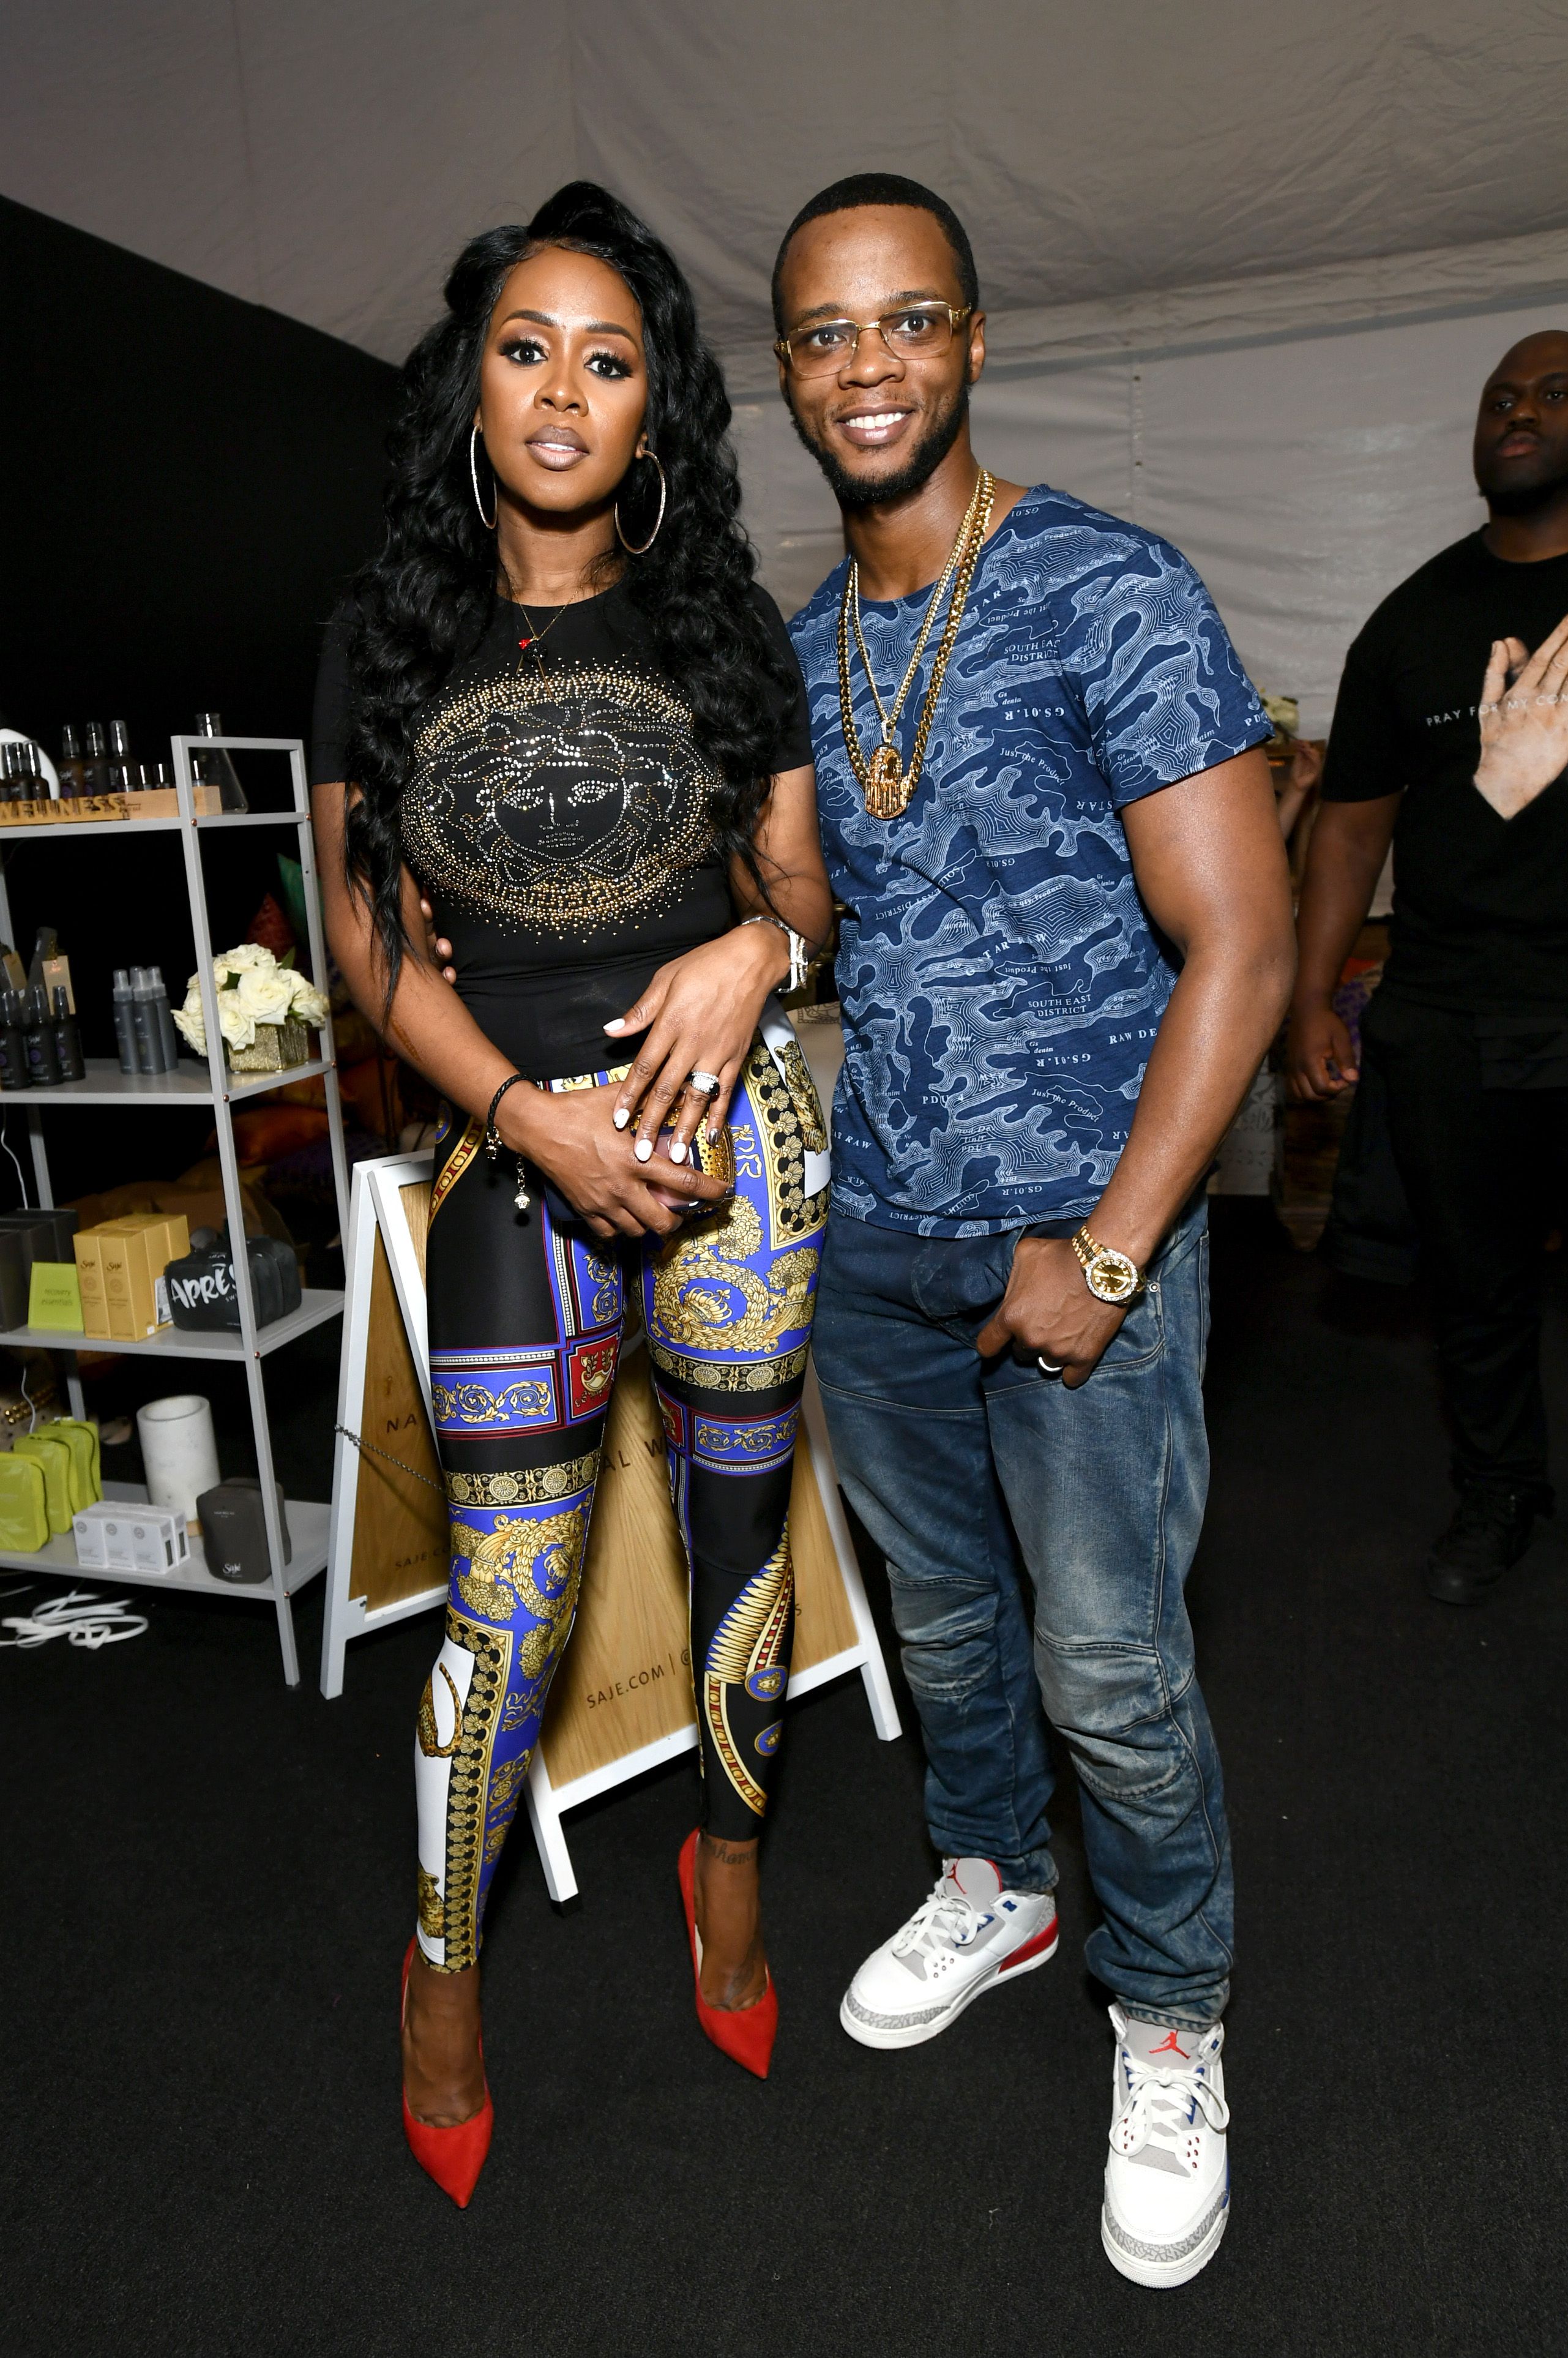 Papoose and rapper Remy Ma at the BET Awards gift lounge on June 22, 2018 in Los Angeles. | Photo: Getty Images